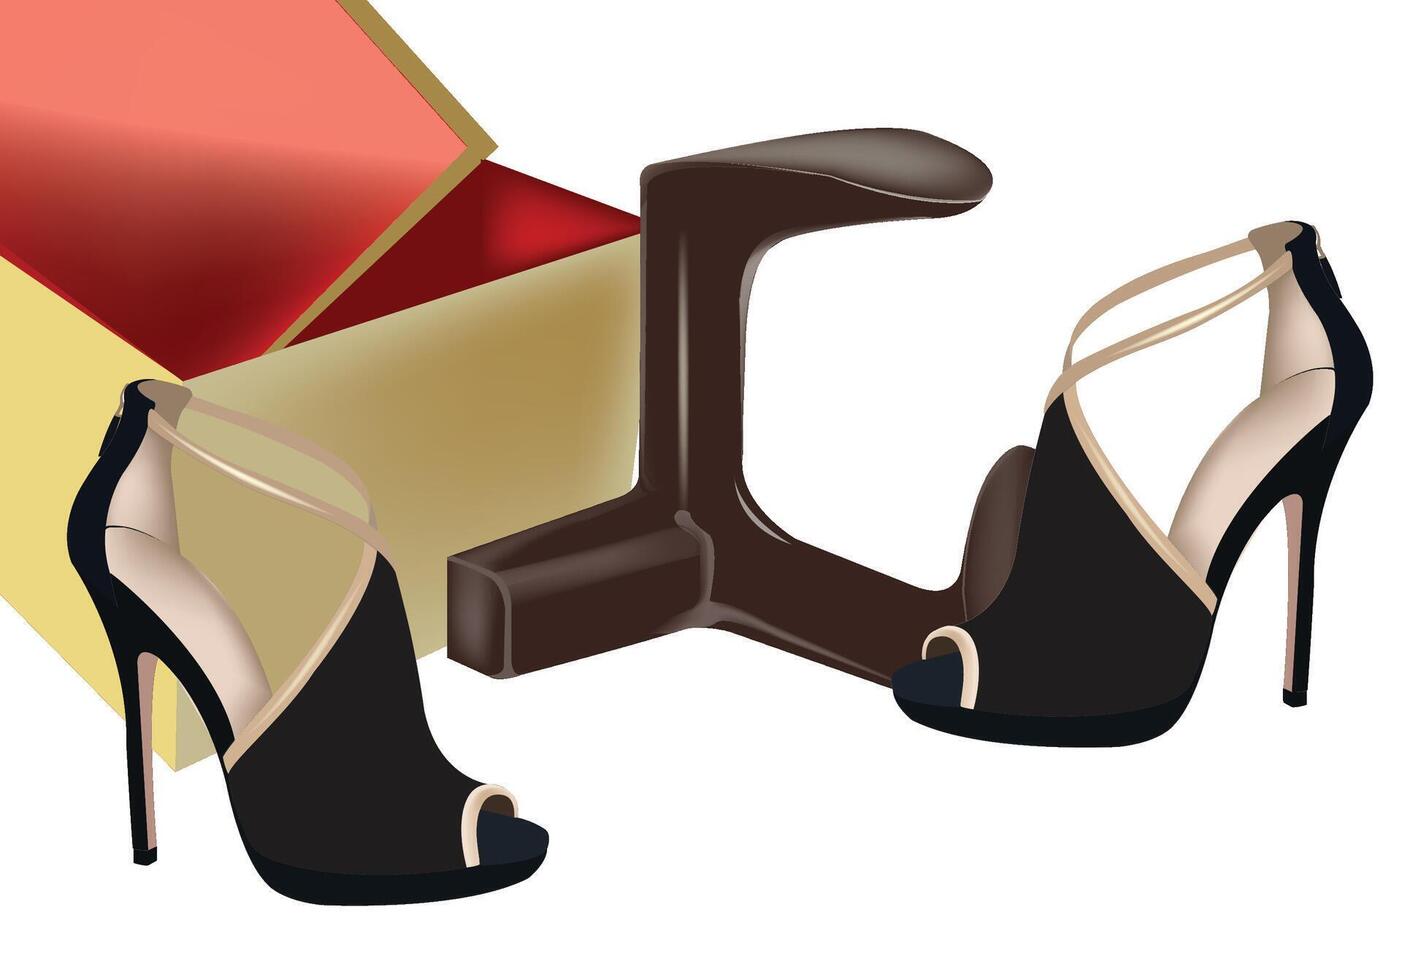 Elegant stiletto shoes and chocolate vector